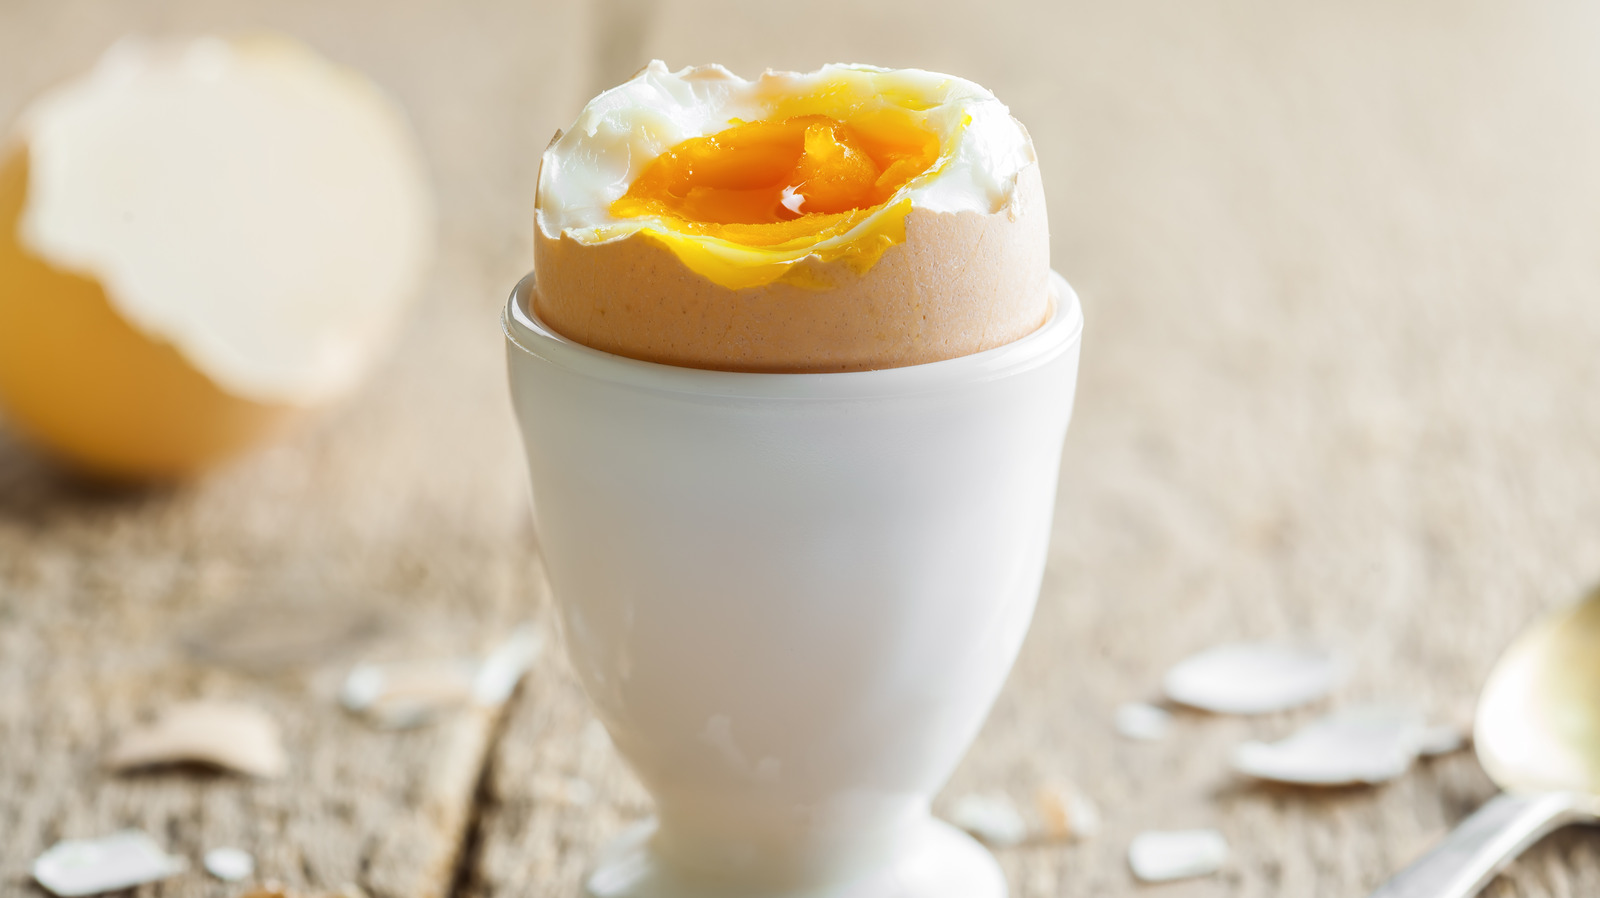 https://www.tastingtable.com/img/gallery/the-10-best-electric-egg-cookers-ranked/l-intro-1679419520.jpg